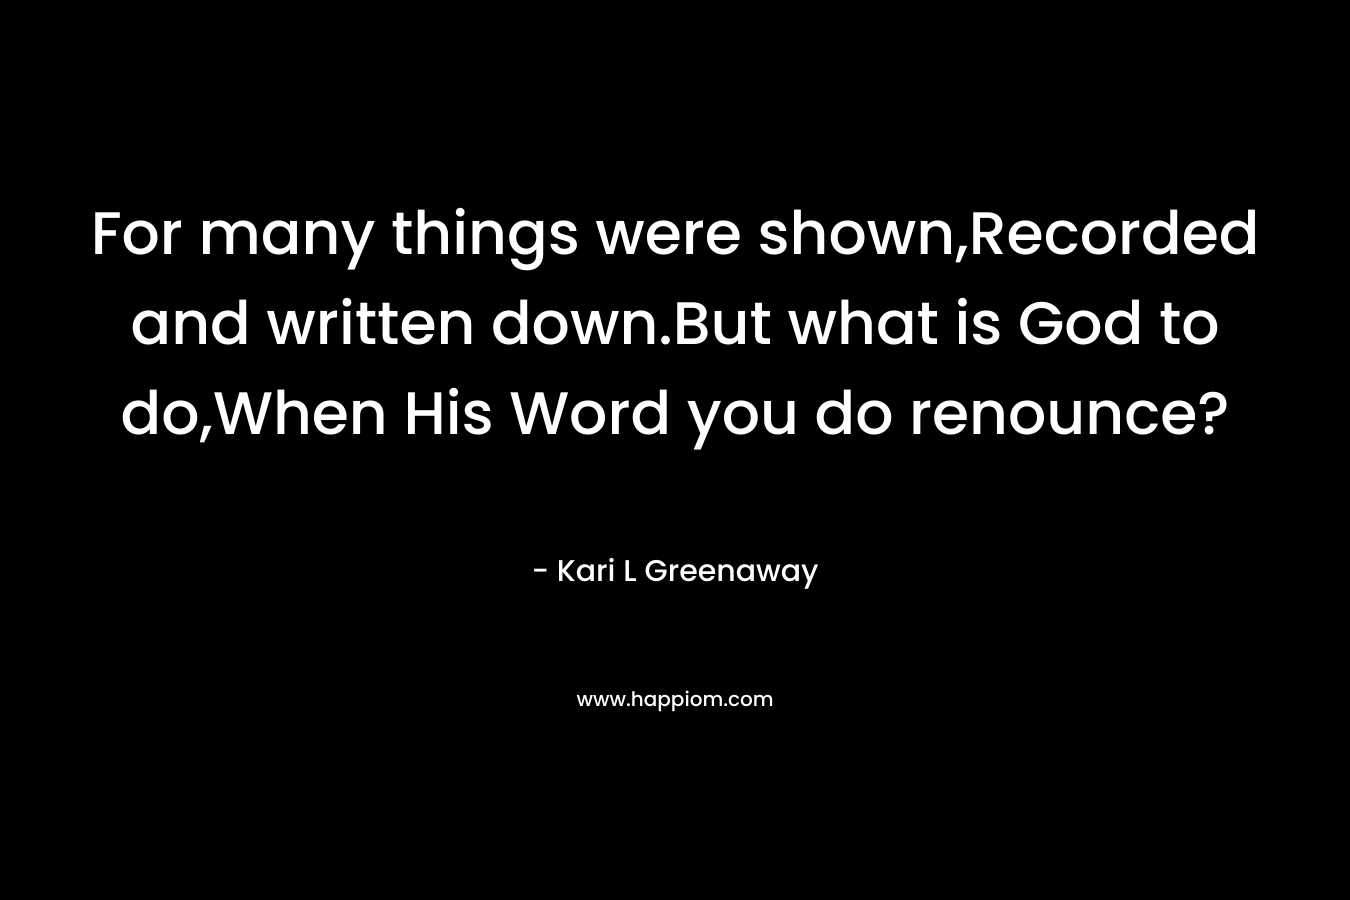 For many things were shown,Recorded and written down.But what is God to do,When His Word you do renounce?